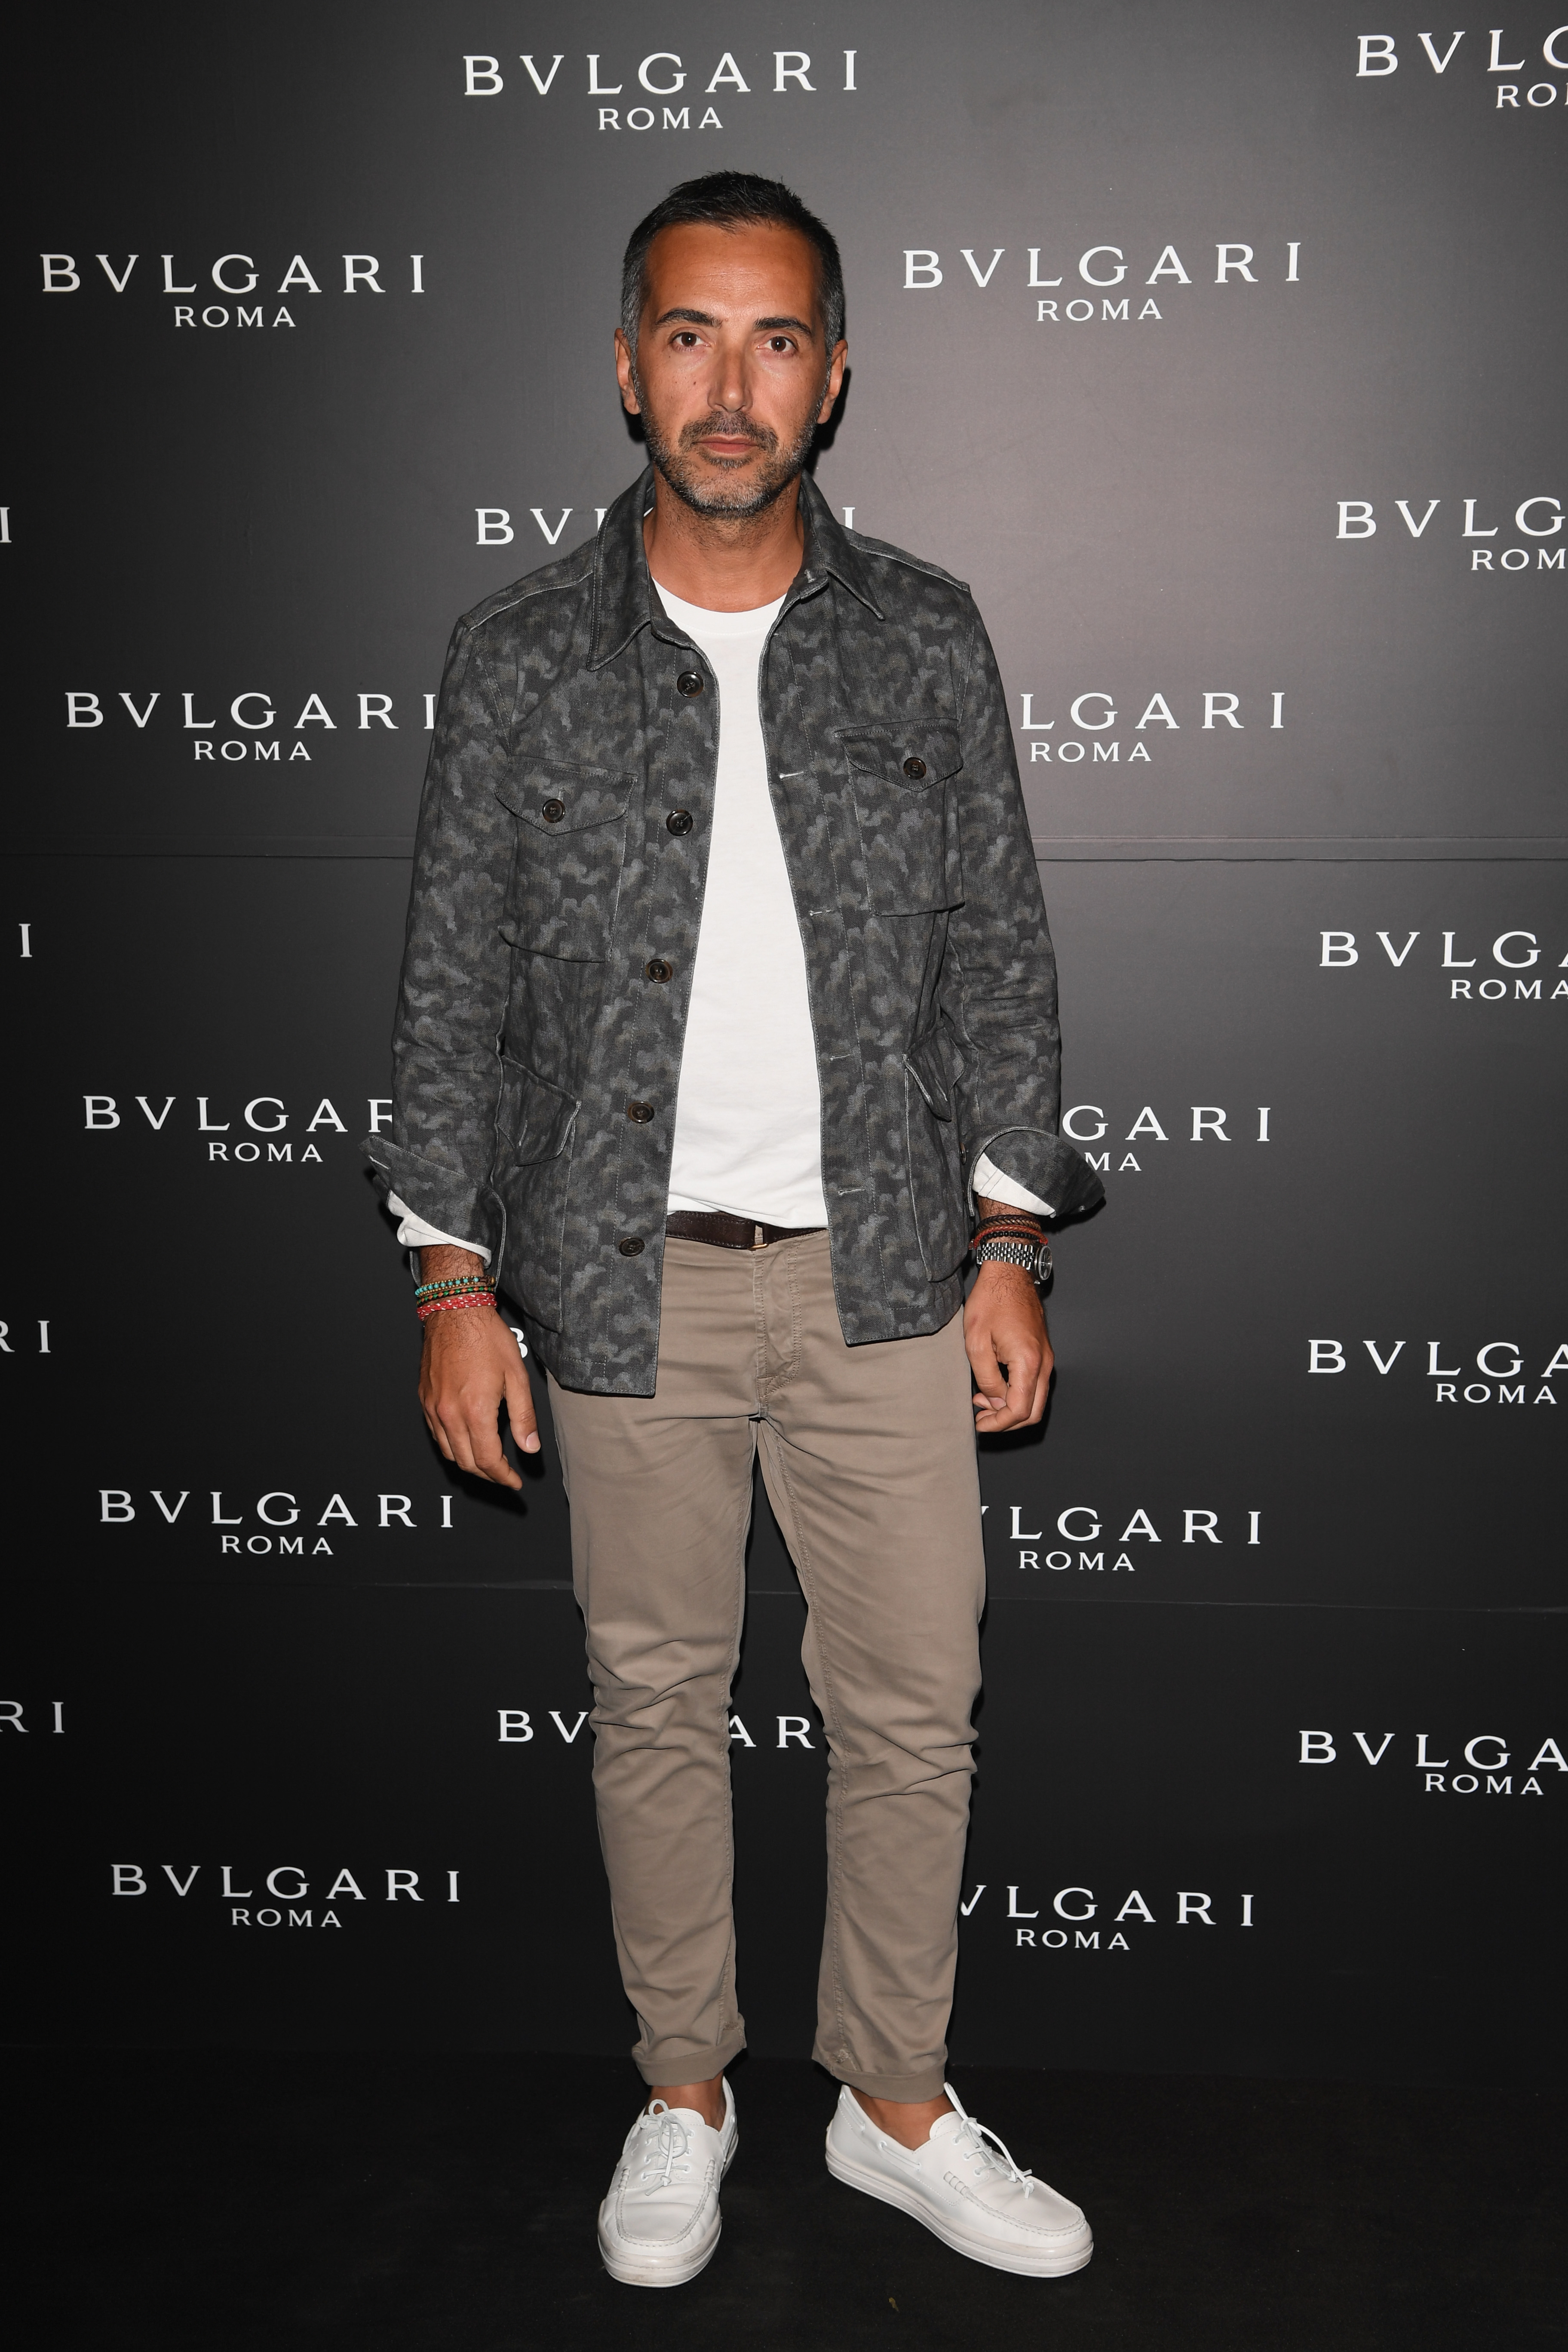 MILAN, ITALY - APRIL 12:  Andrea Incontri attends BVLGARI Celebration of B.Zero1 At Milan Design Week at Hotel Bulgari on April 12, 2016 in Milan, Italy.  (Photo by Venturelli/Getty Images for BVLGARI) *** Local Caption *** Andrea Incontri